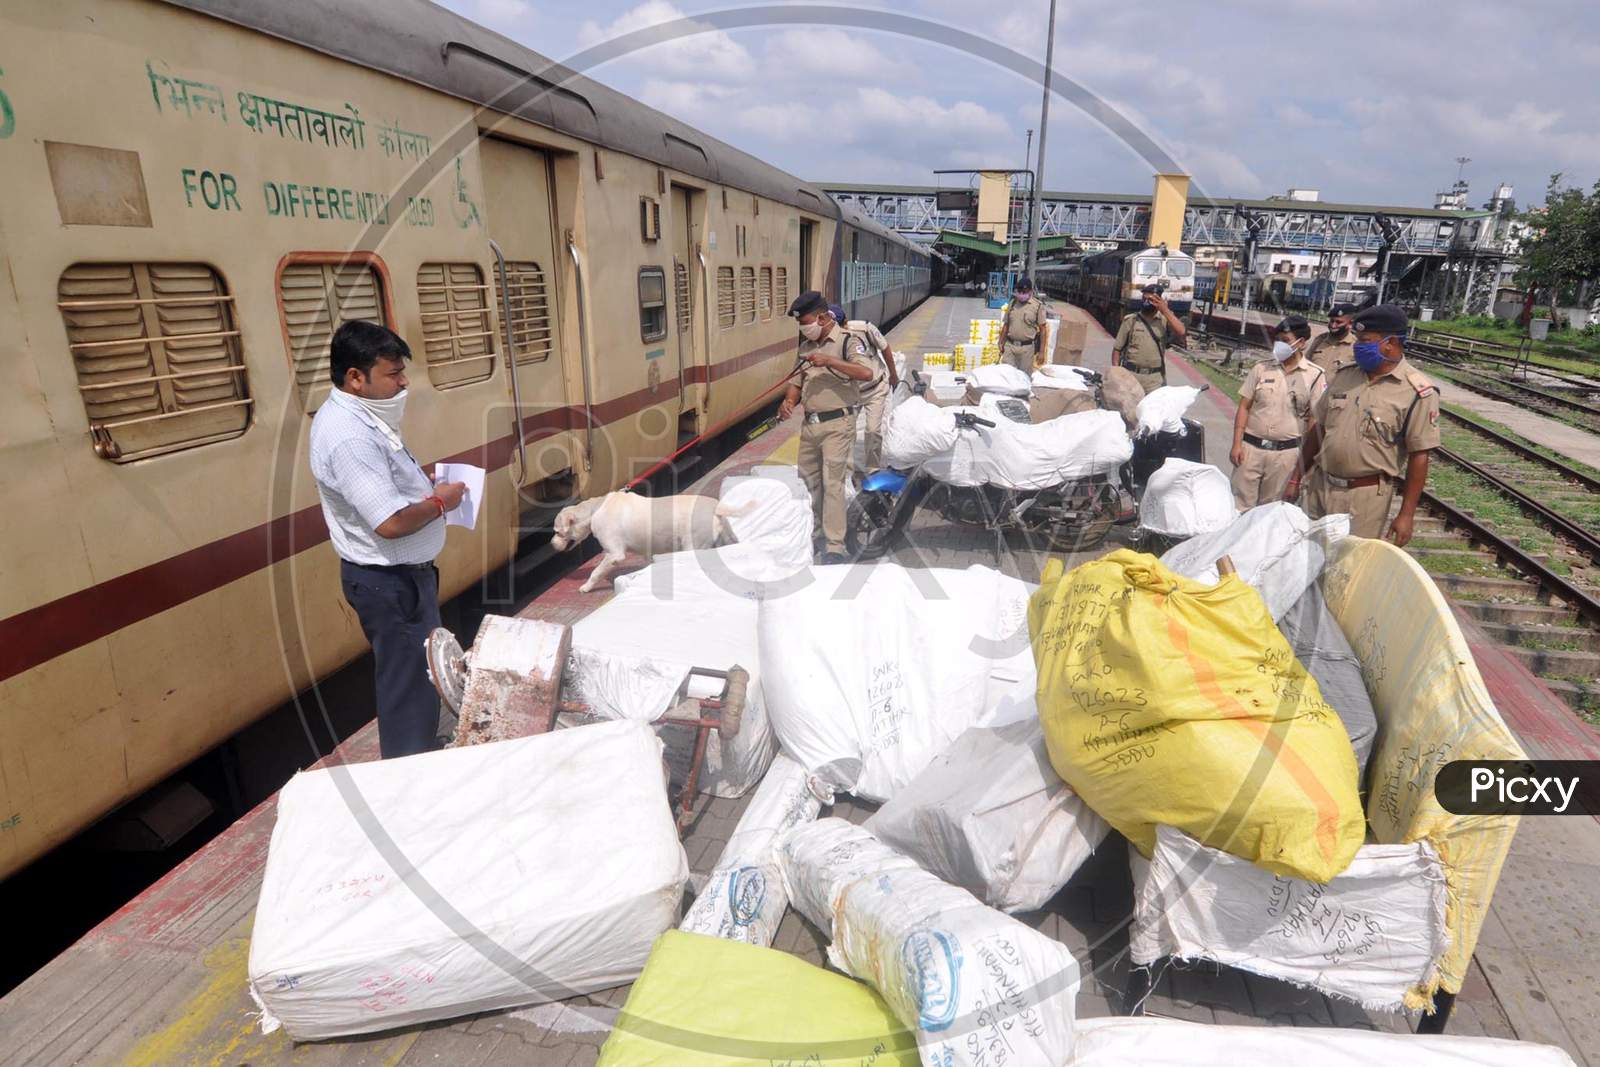 Railway Police Force (Rpf) Personnel Inspect Platform Along With A Sniffer Dog, Ahead Of The Independence Day Celebrations, In Guwahati On Monday, Aug 10, 2020.